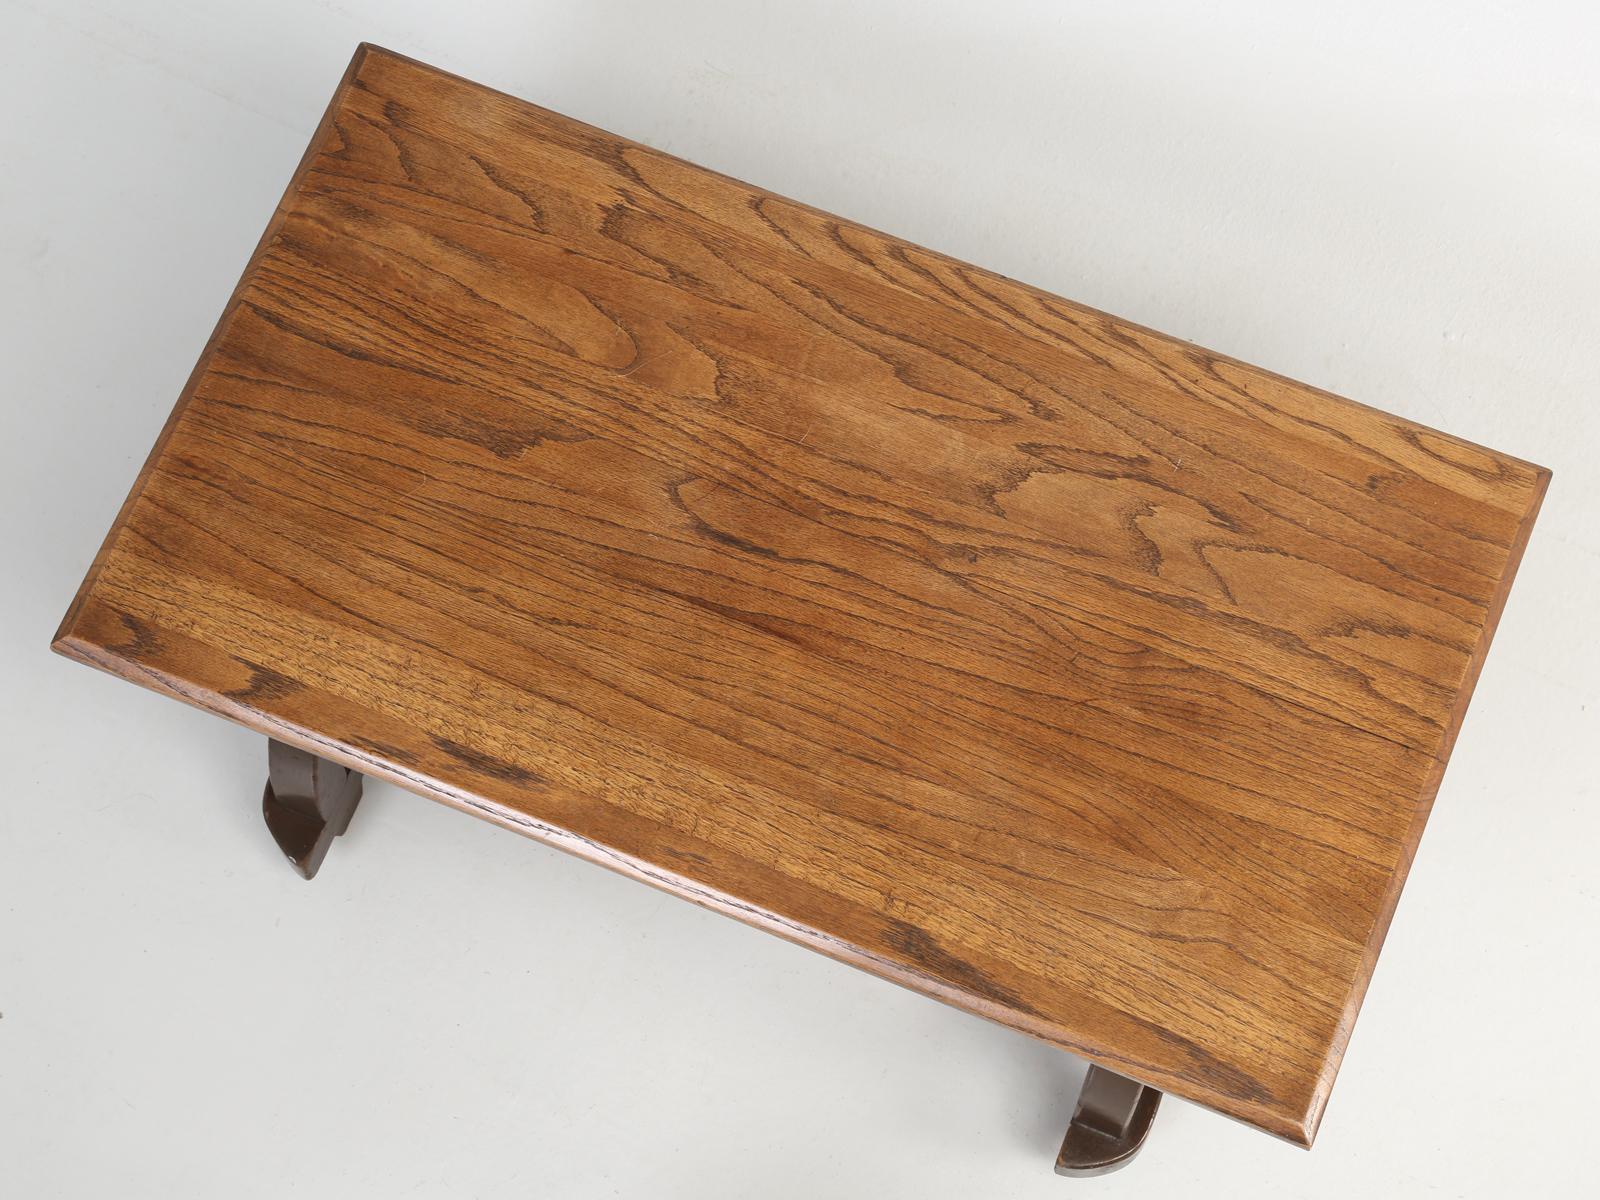 American Western style Wagon-Wheel coffee table or commonly referred to as Ranch oak furniture. The Ranch oak coffee table is in nice original condition and has not been restored.
Please note small gap between the boards on top (image 8).